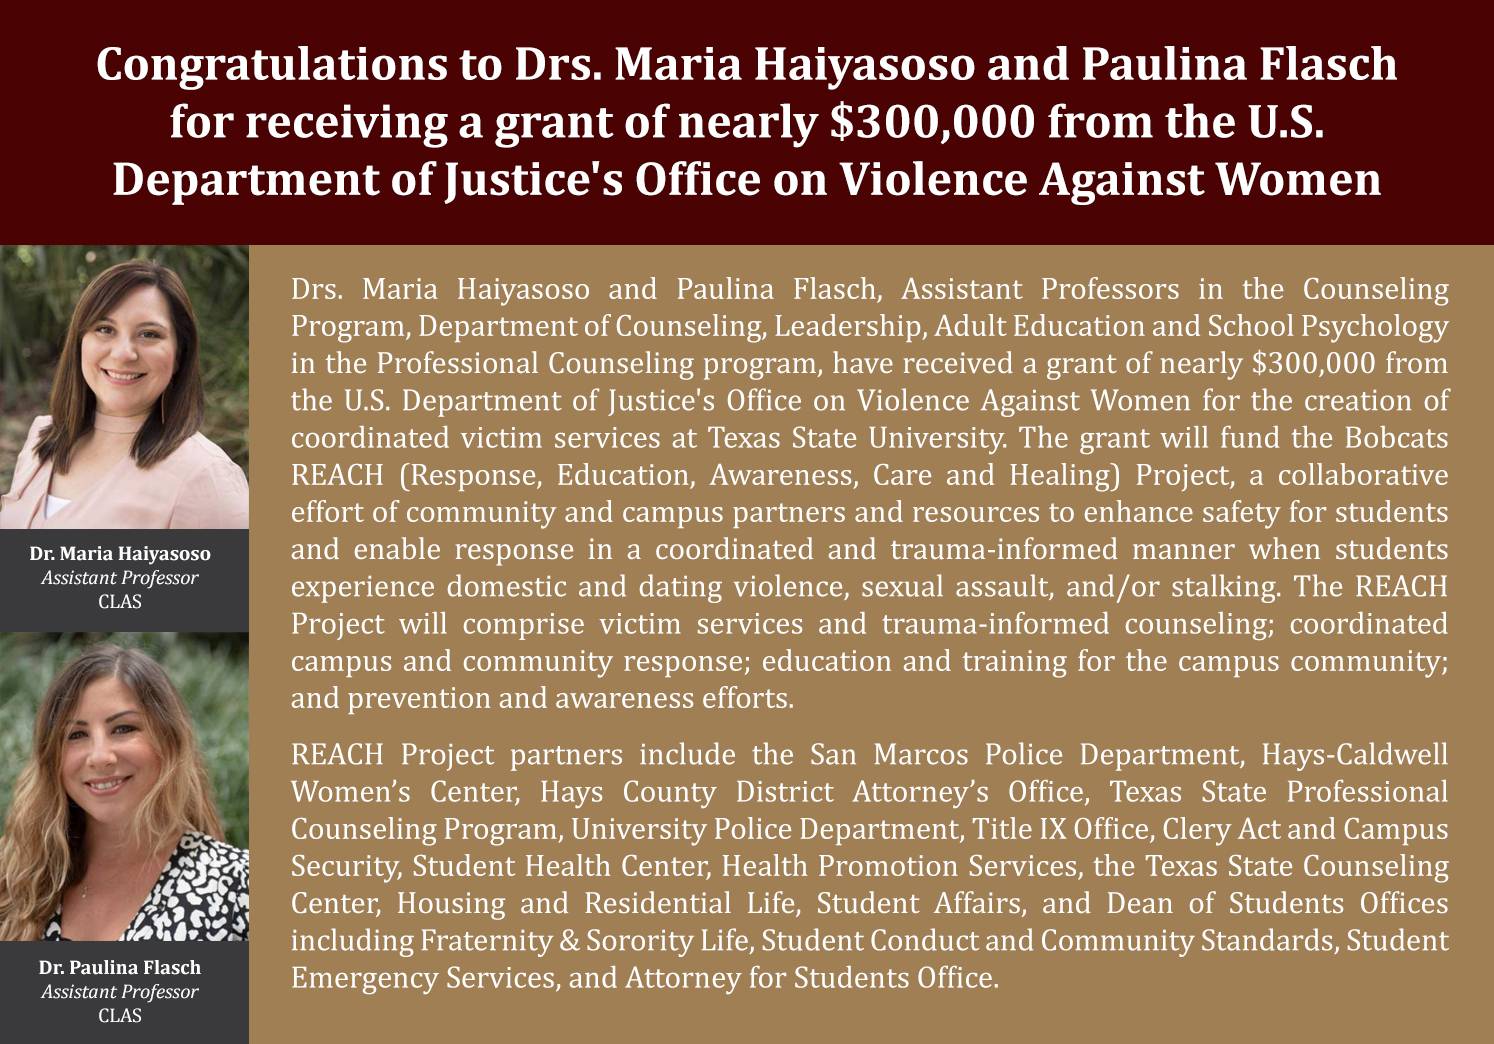 Drs. Maria Haiyasso and Paulina Flasch grant announcement graphic